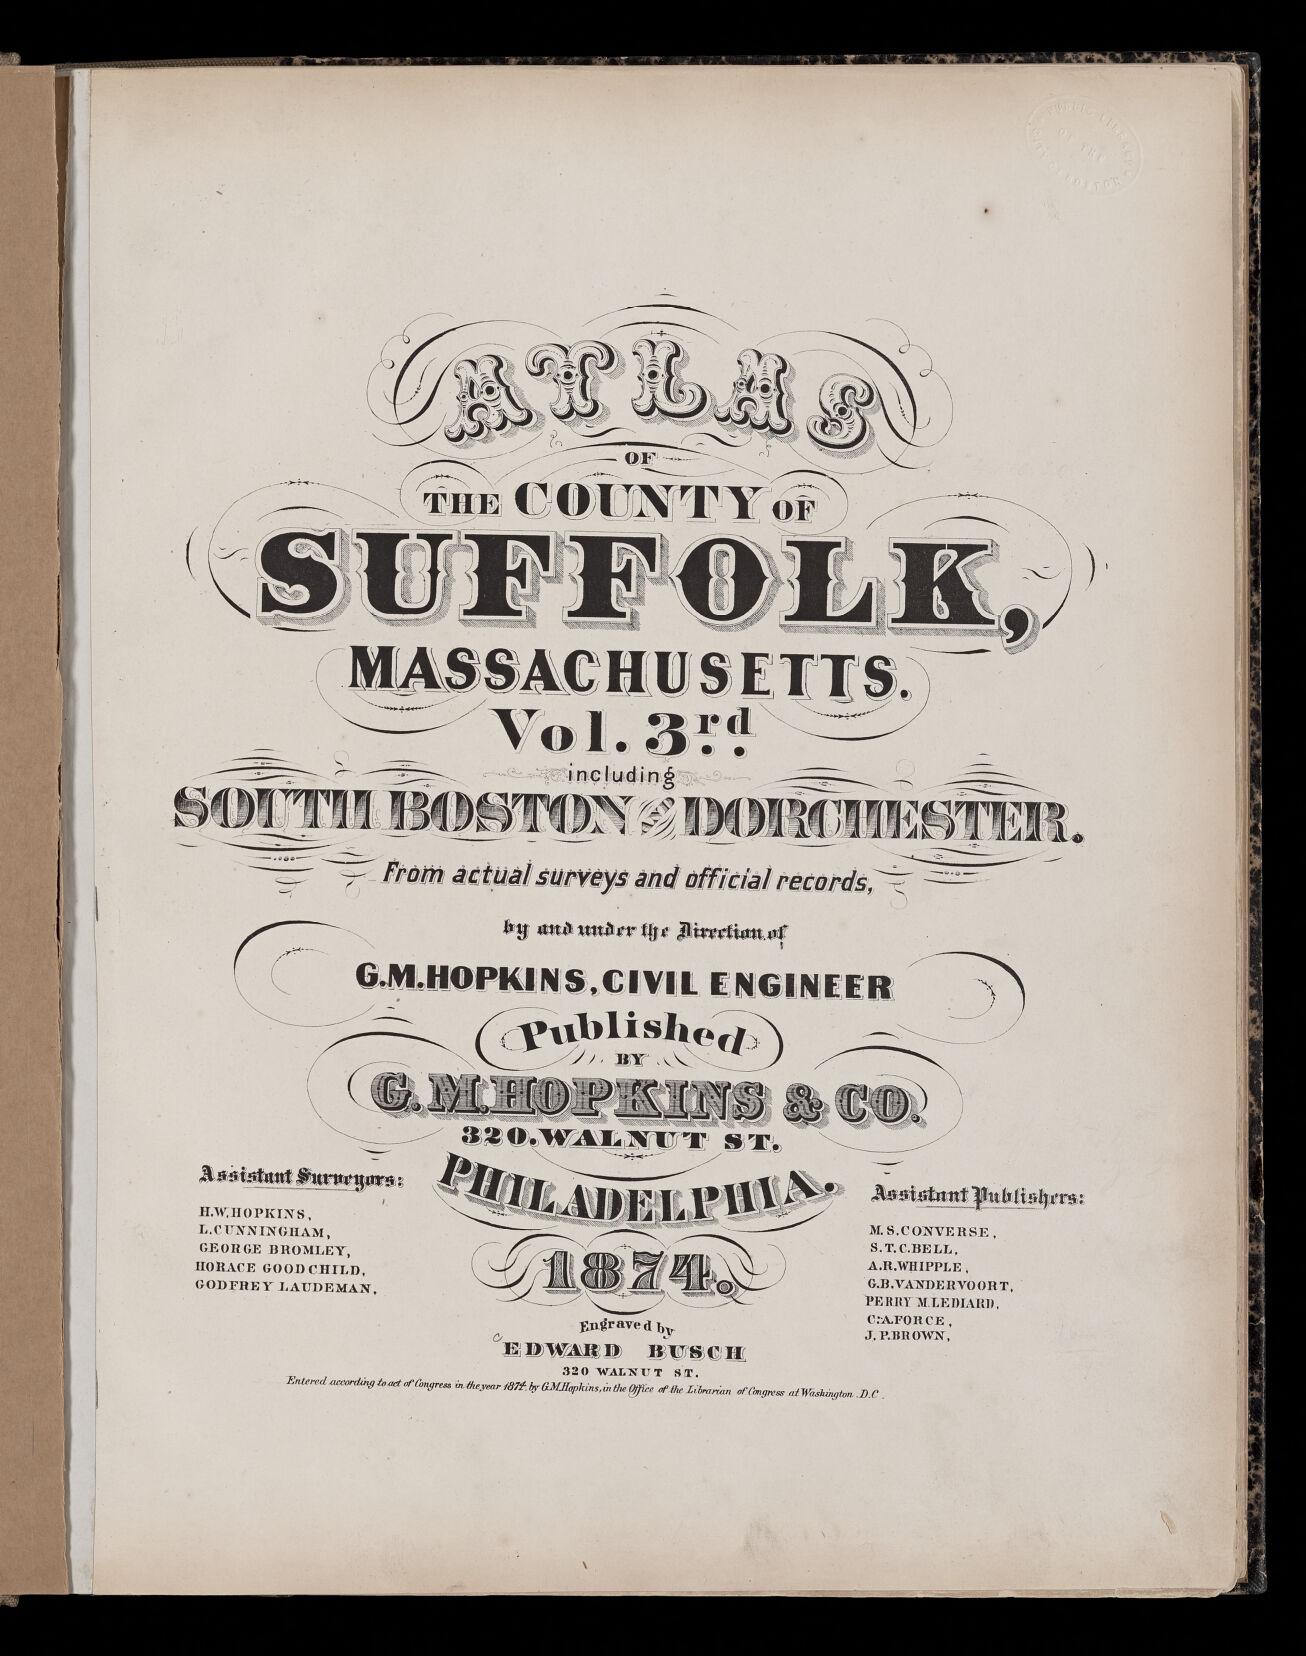 Atlas of the county of Suffolk, Massachusetts : vol. 3rd including Boston and Dorchester